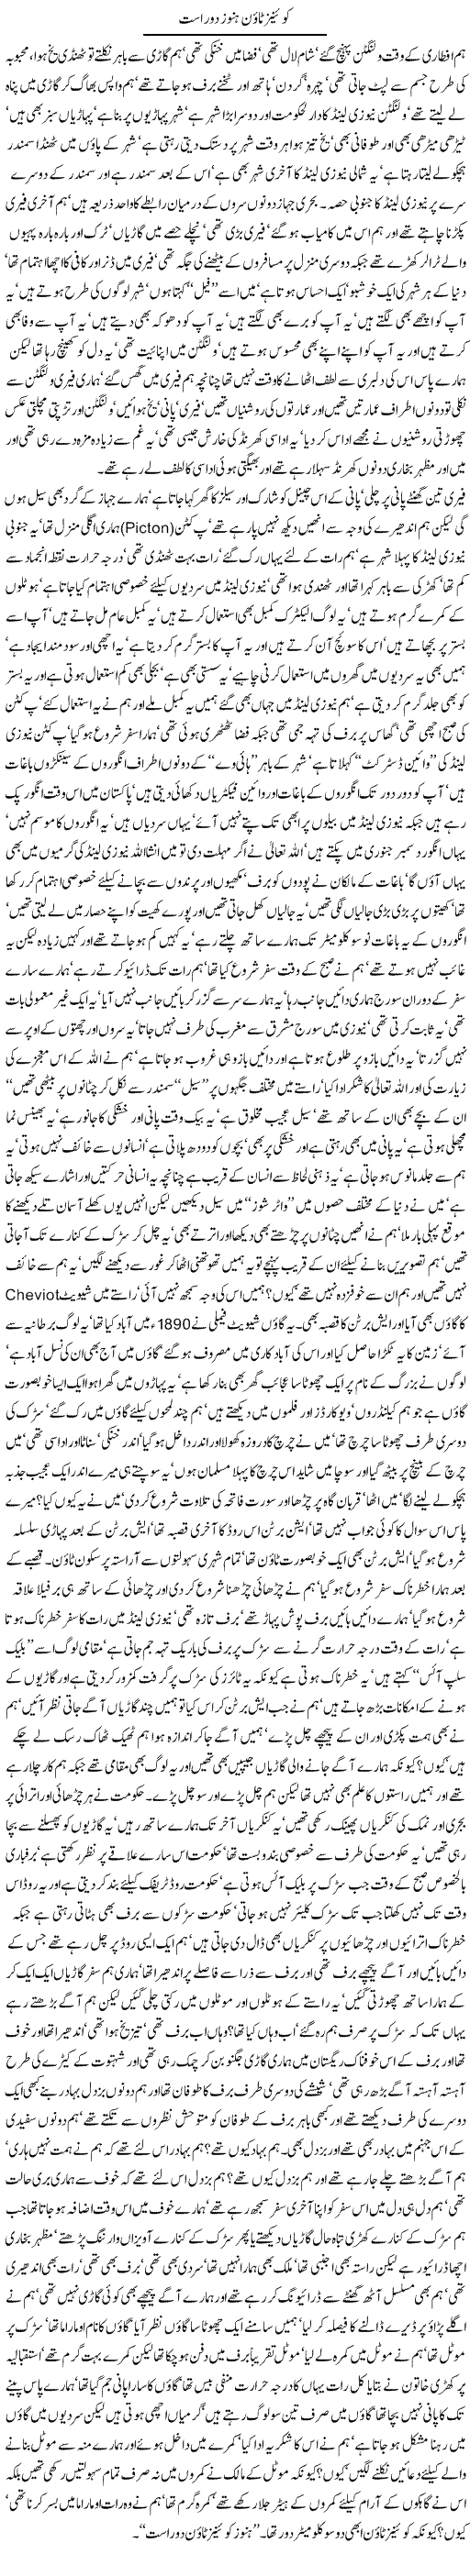 Queens Town Hanoz o Do Raast by Javed chaudhry